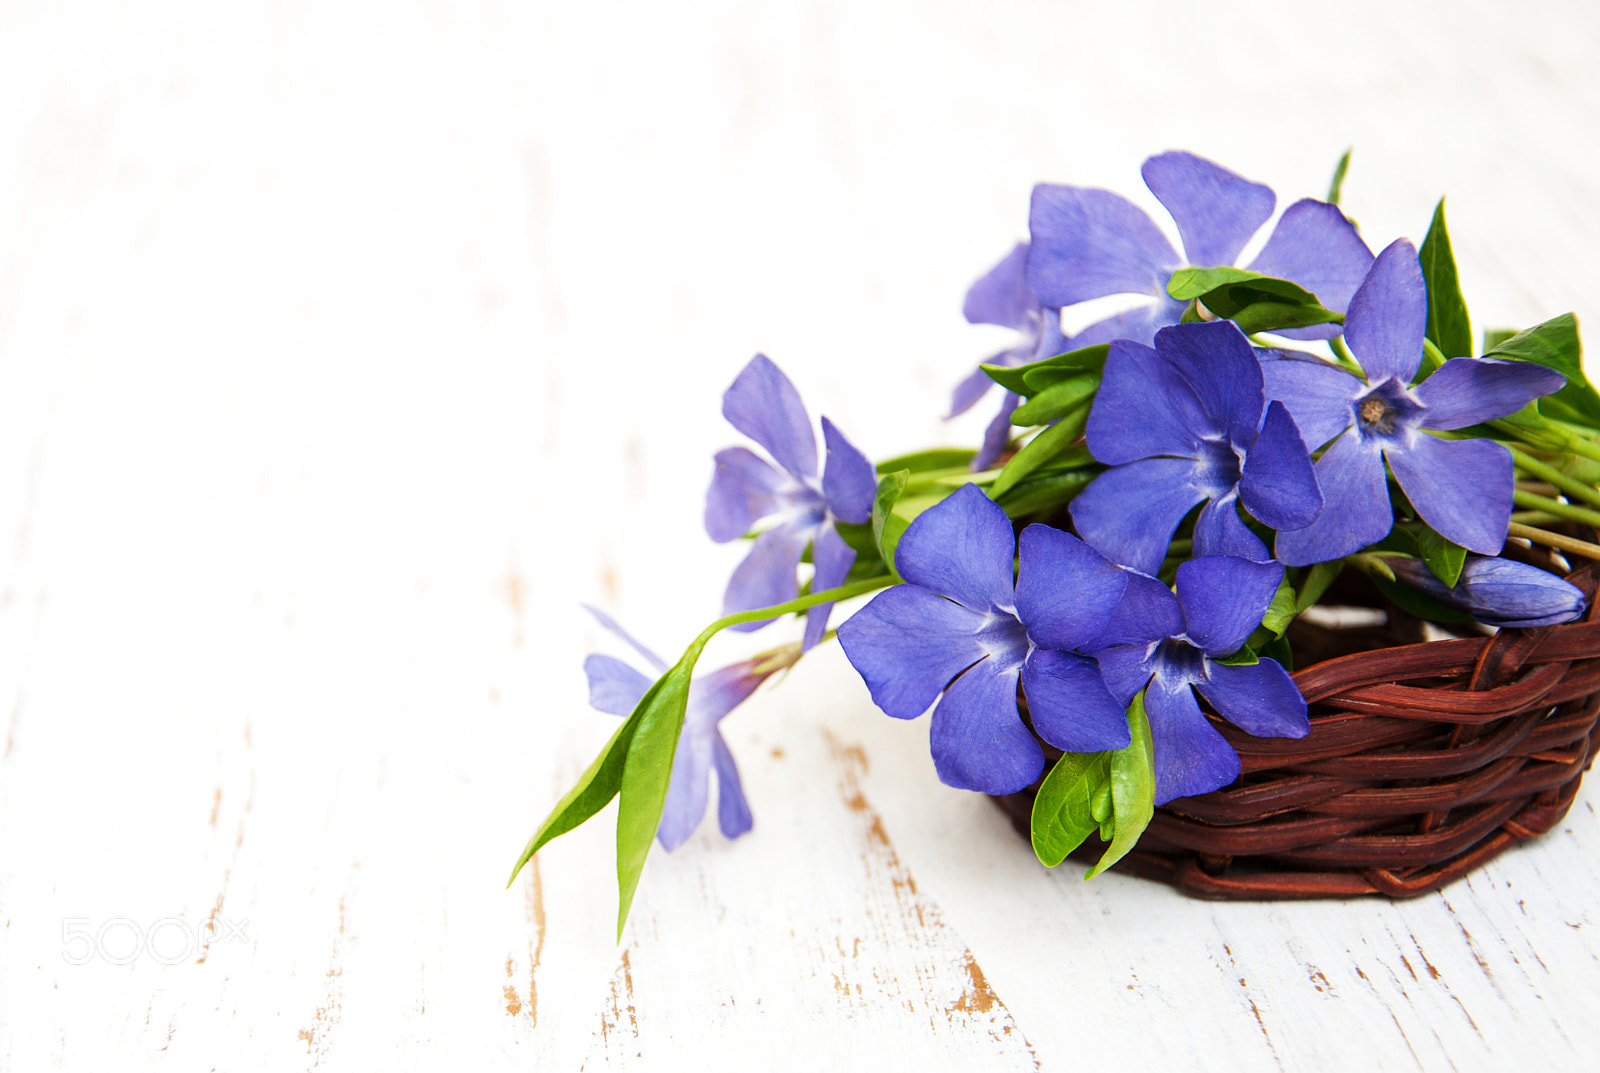 Nikon D90 sample photo. Periwinkle in a basket photography